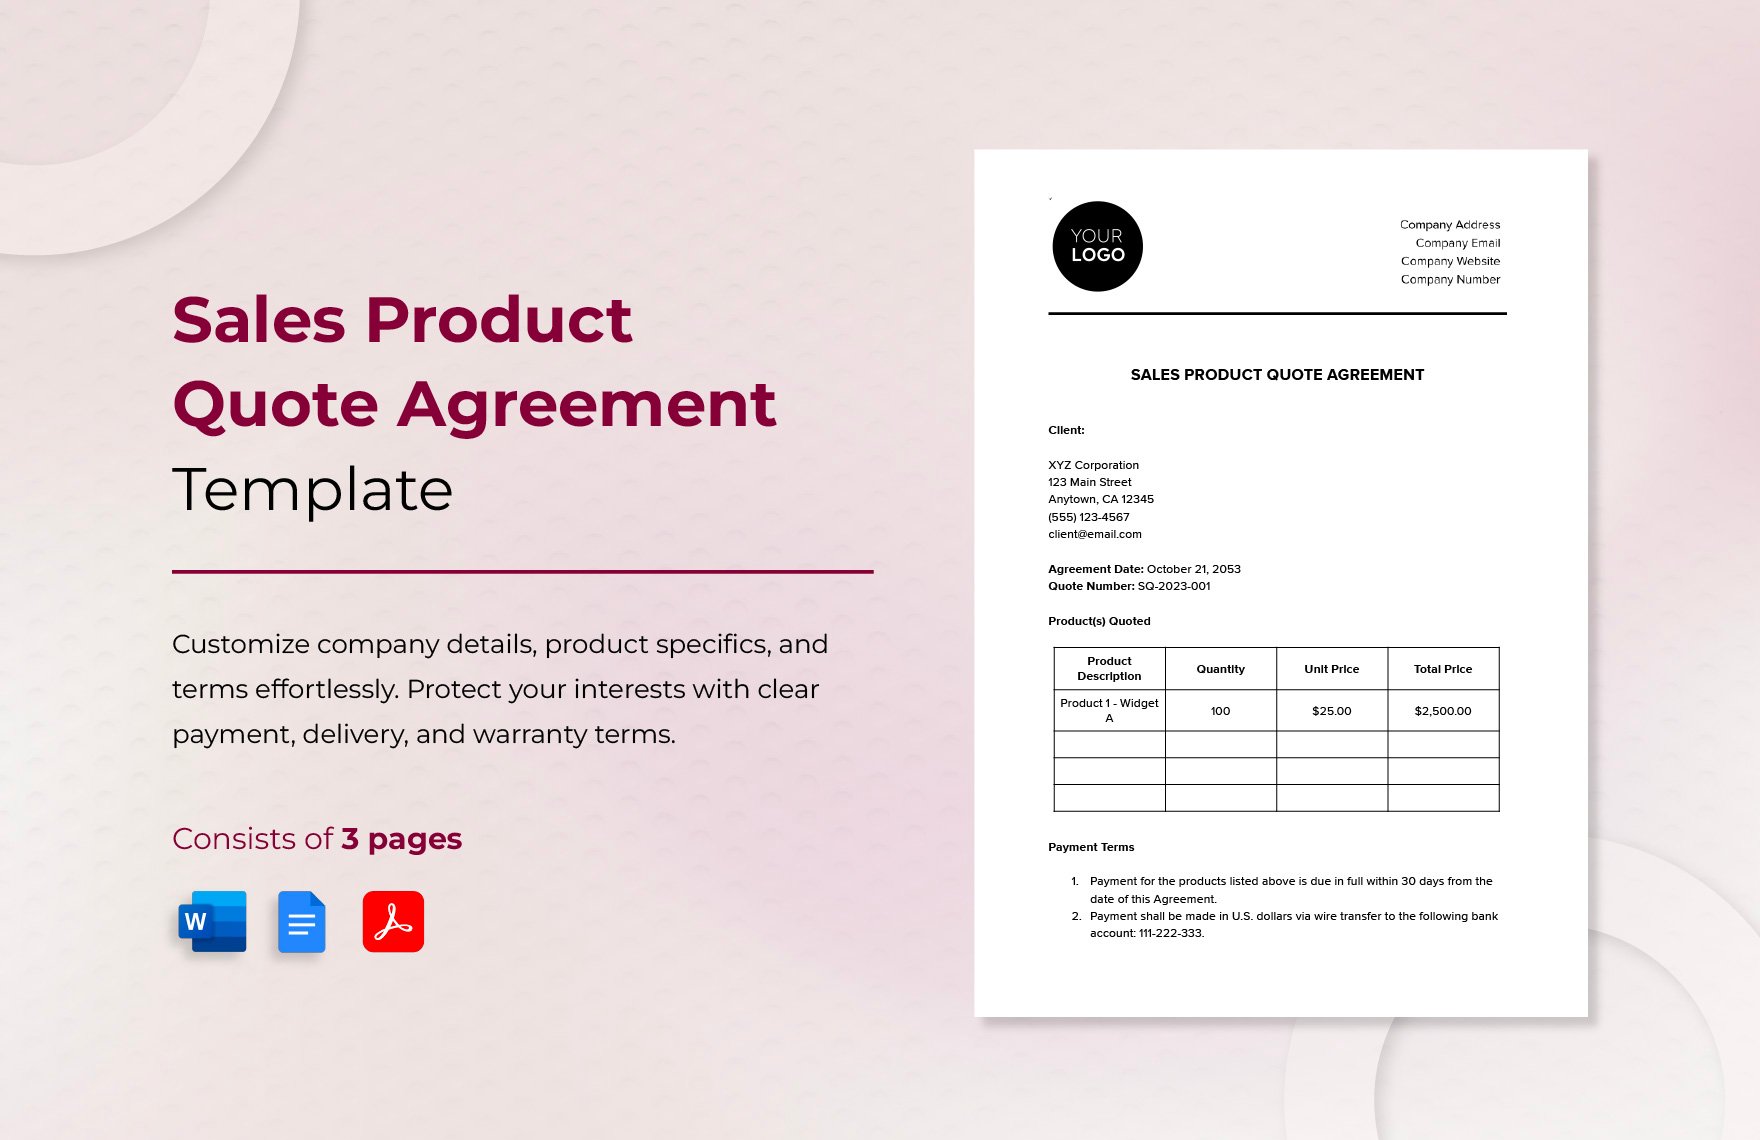 Sales Product Quote Agreement Template